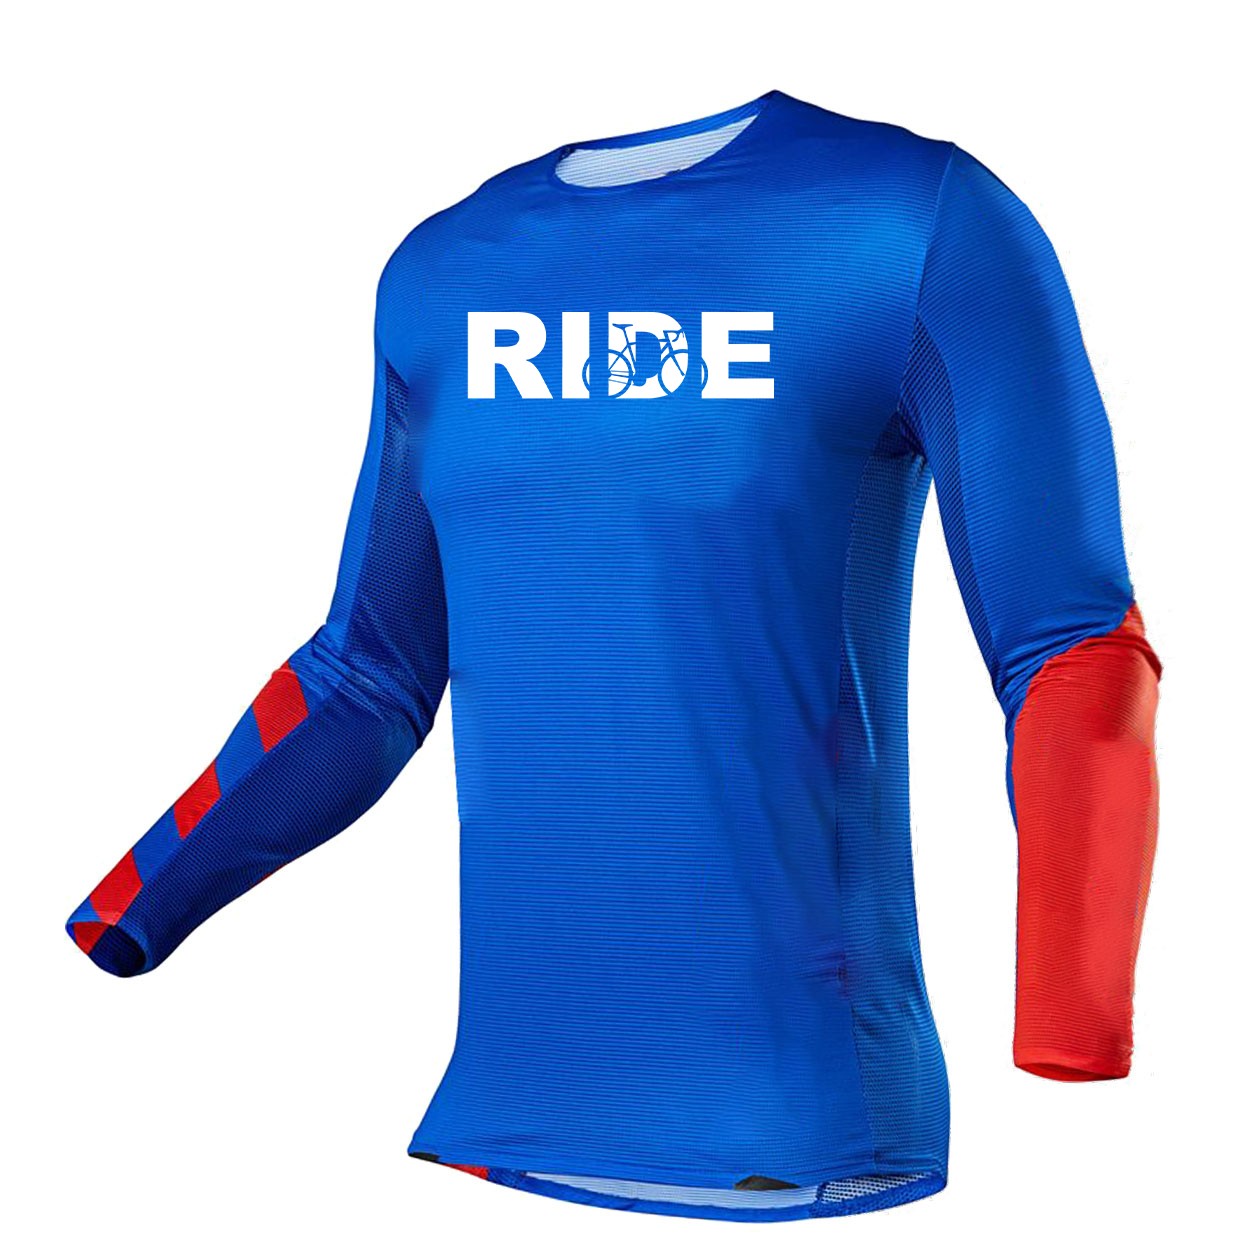 Ride Cycle Logo Classic Performance Jersey Long Sleeve Shirt Blue/Red